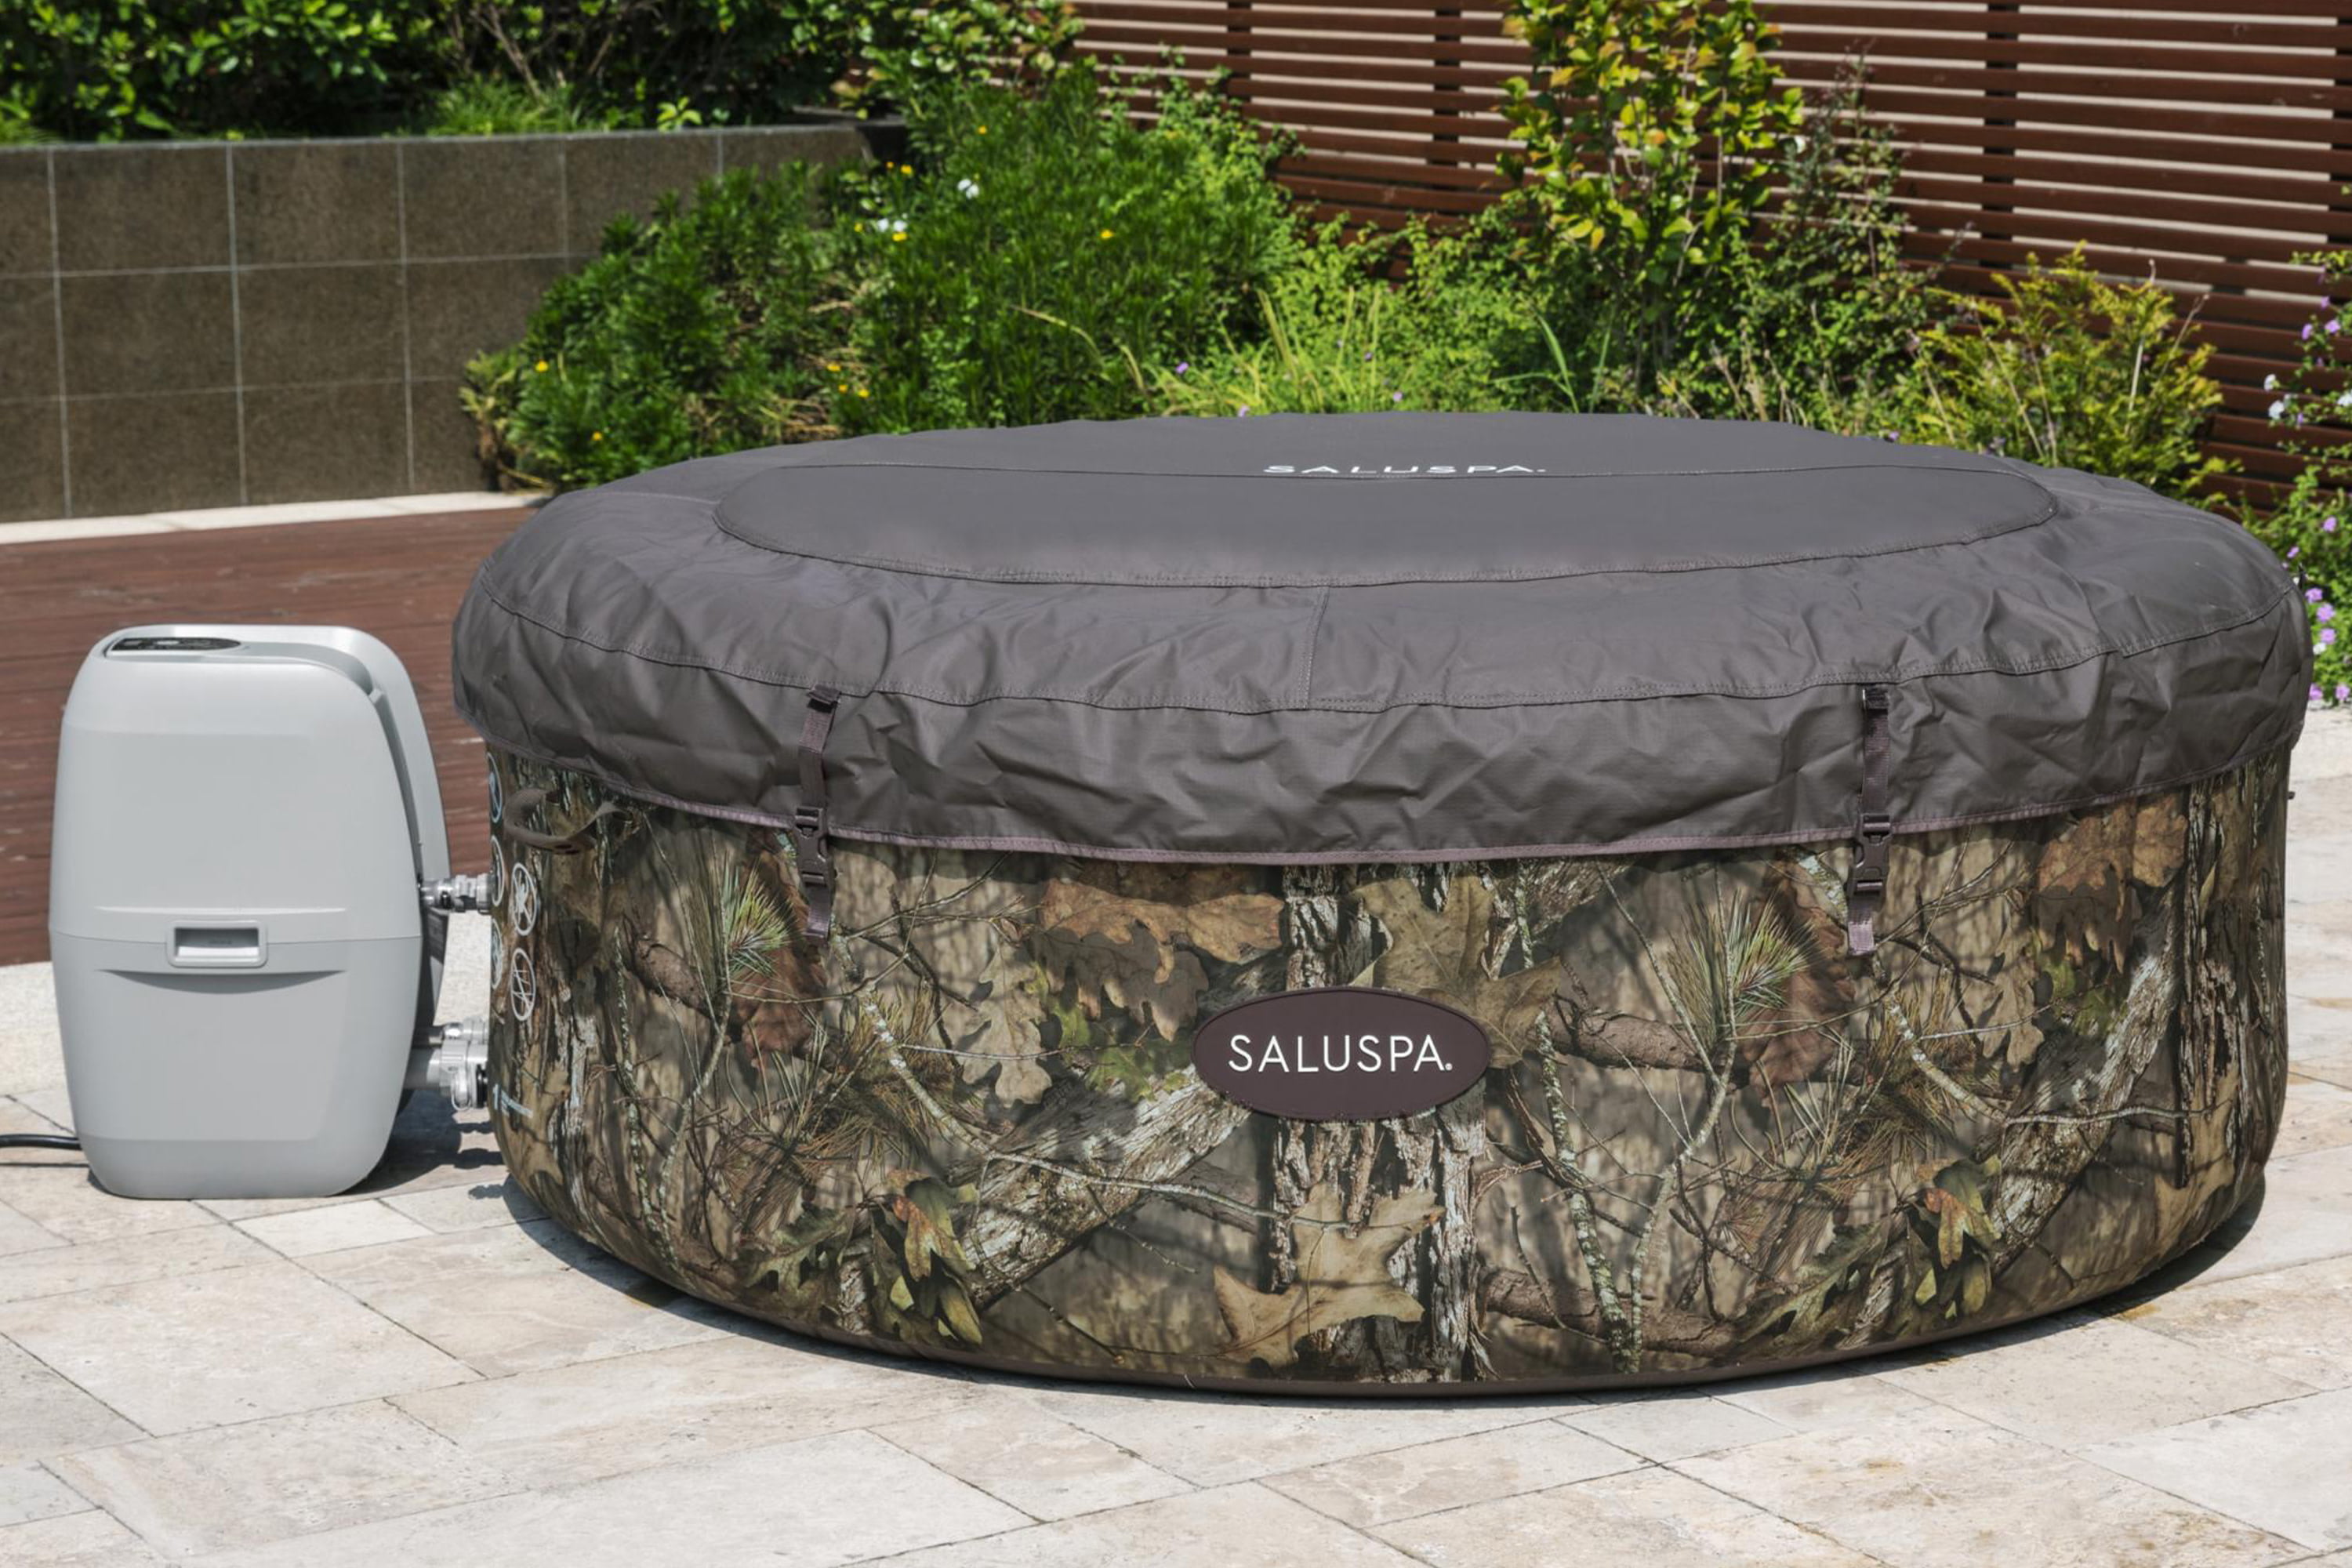 Mossy Oak Inflatable Hot Tub for Outdoors (or Outdoors Inflatable Hot Tub)